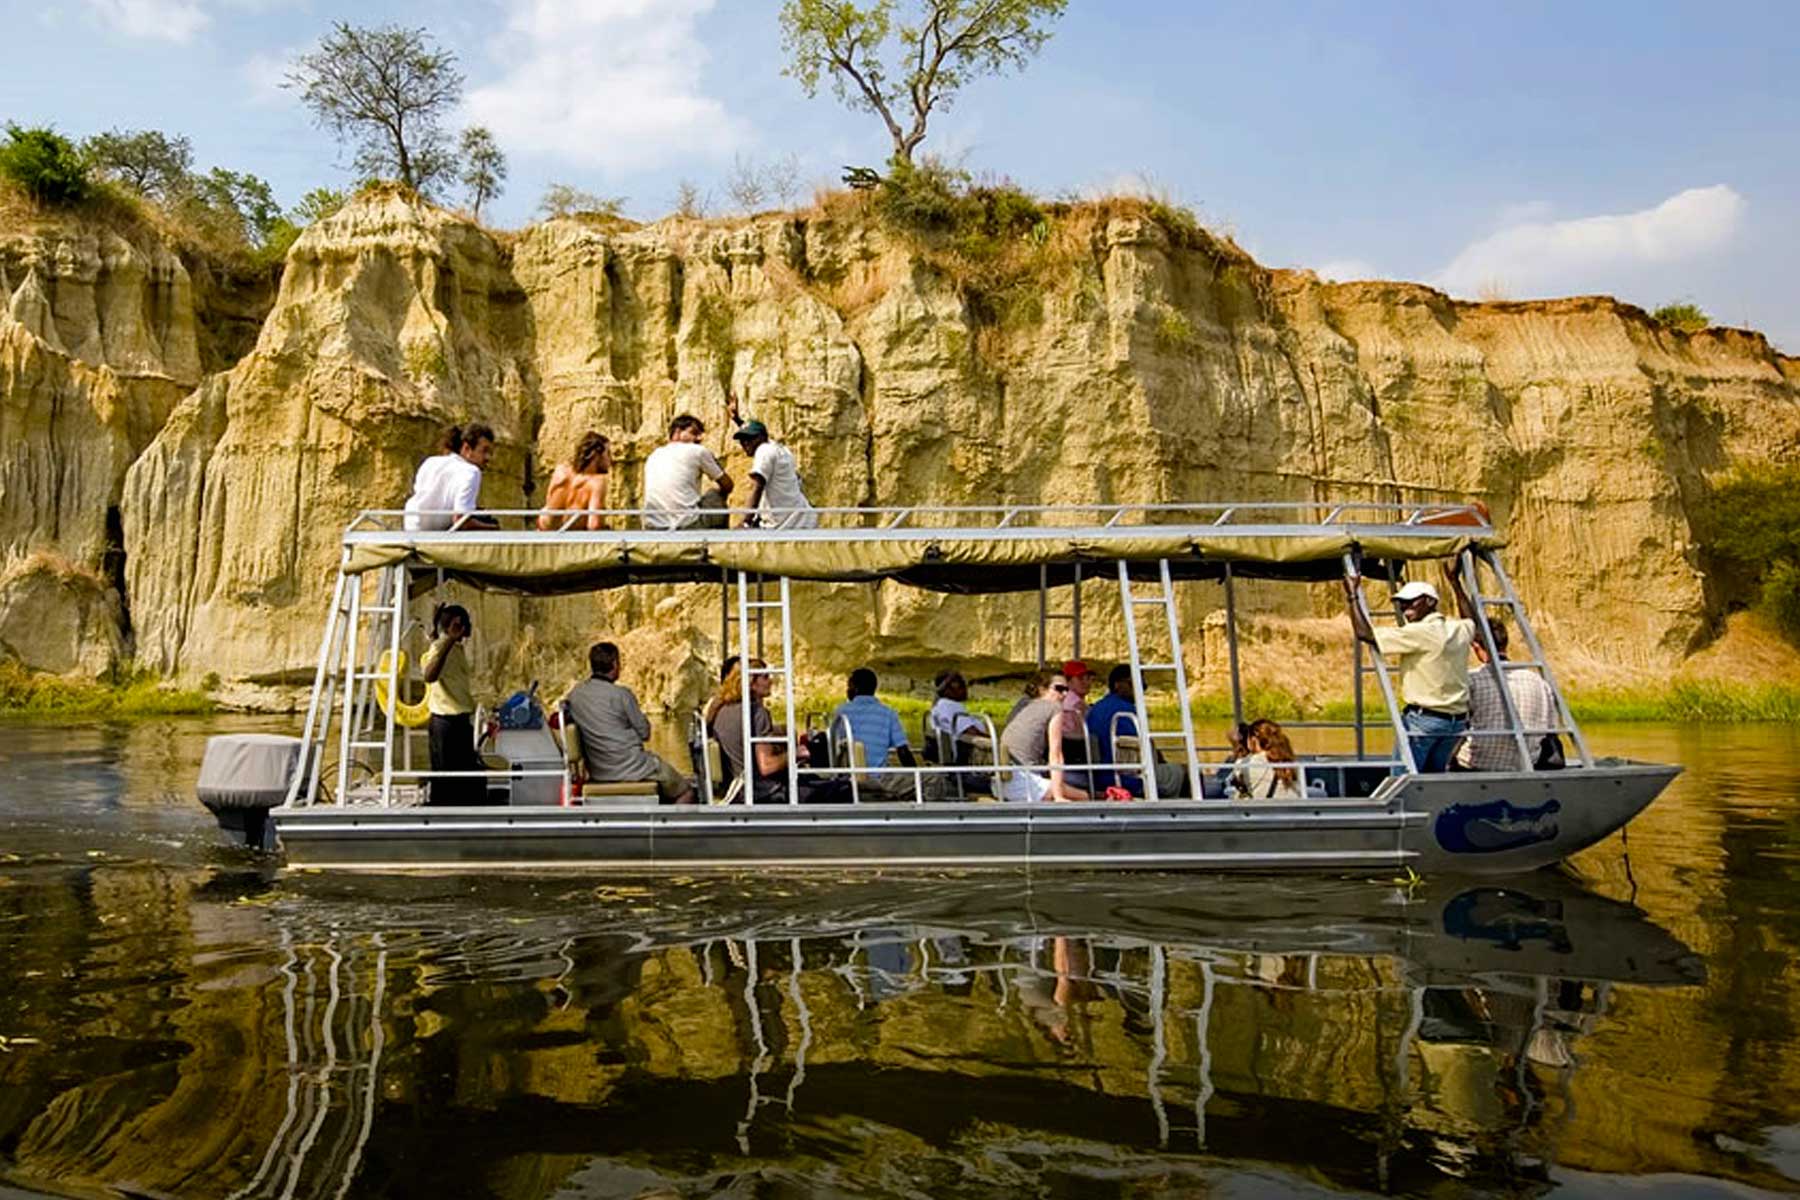 Delta Boat Cruise Experience in Murchison Falls National Park